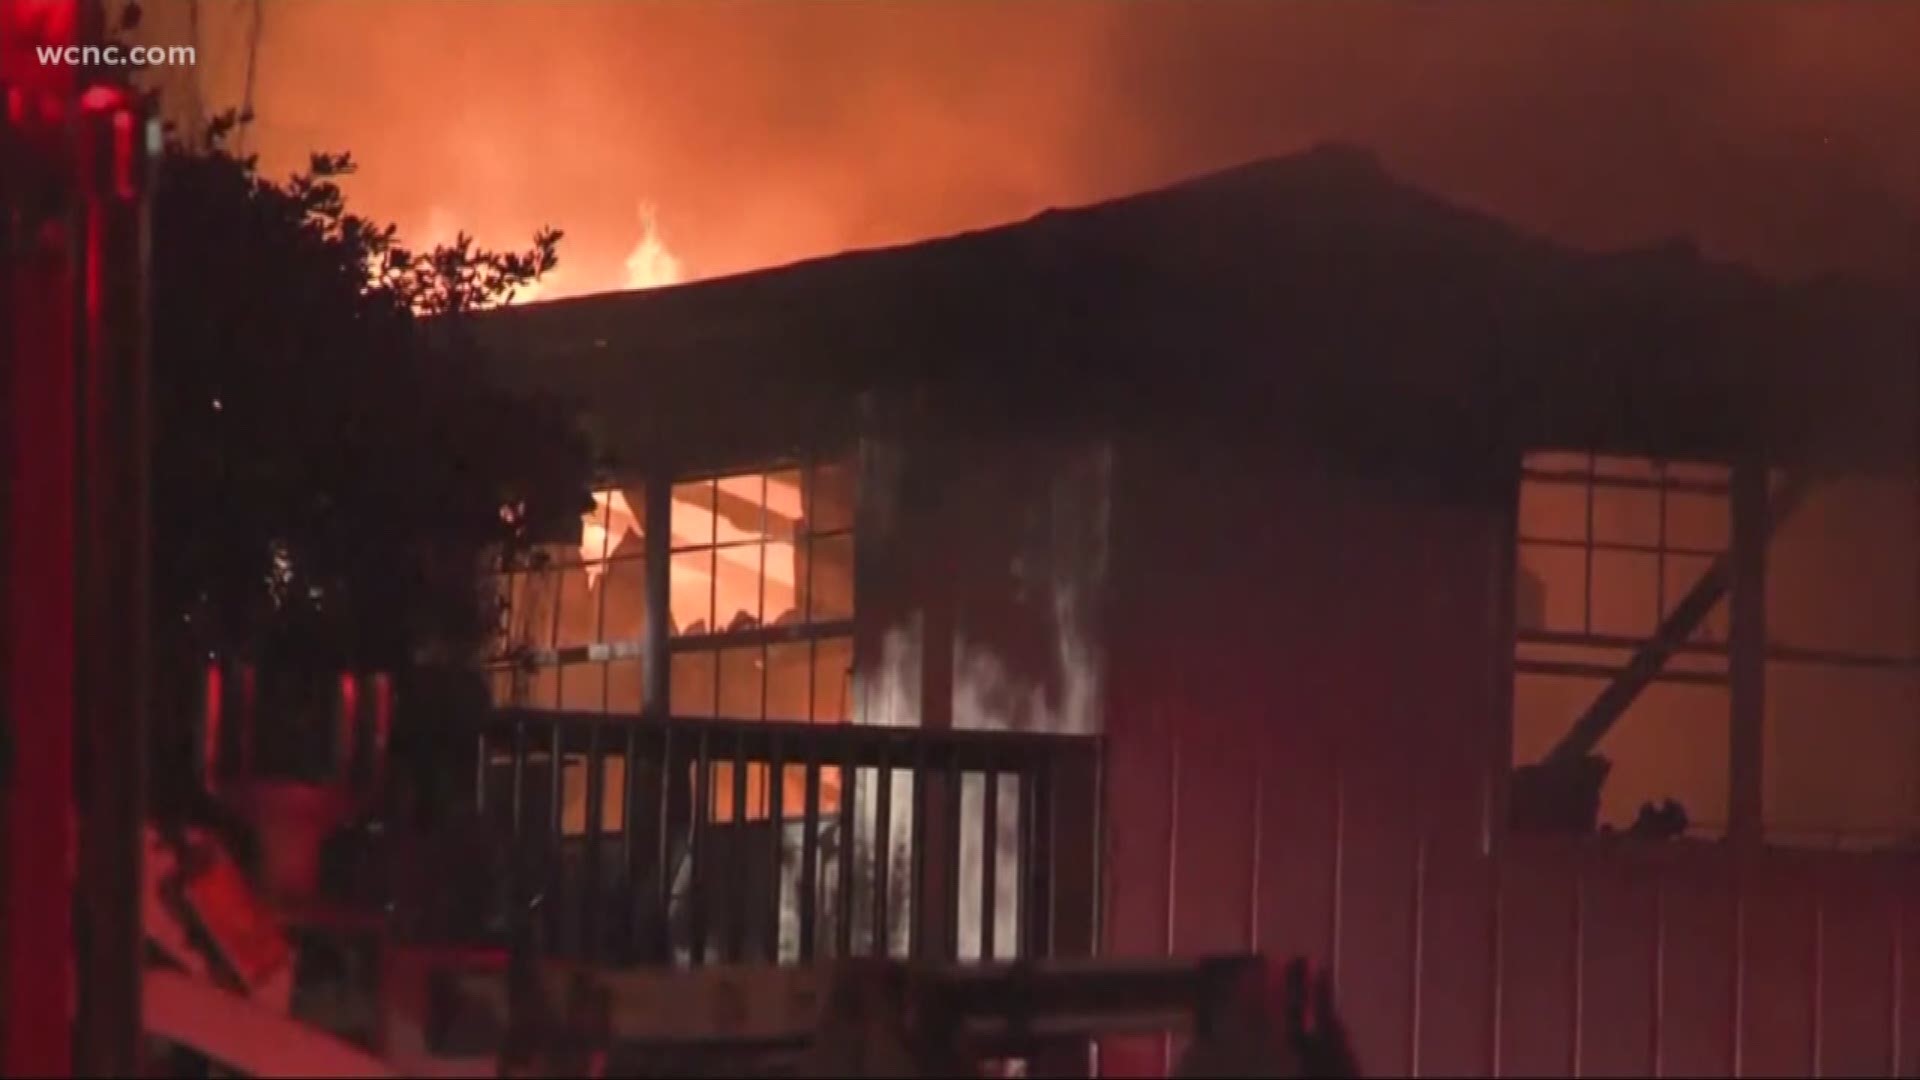 A massive fire in South Carolina was sparked by an air conditioner. It has homeowners on edge.